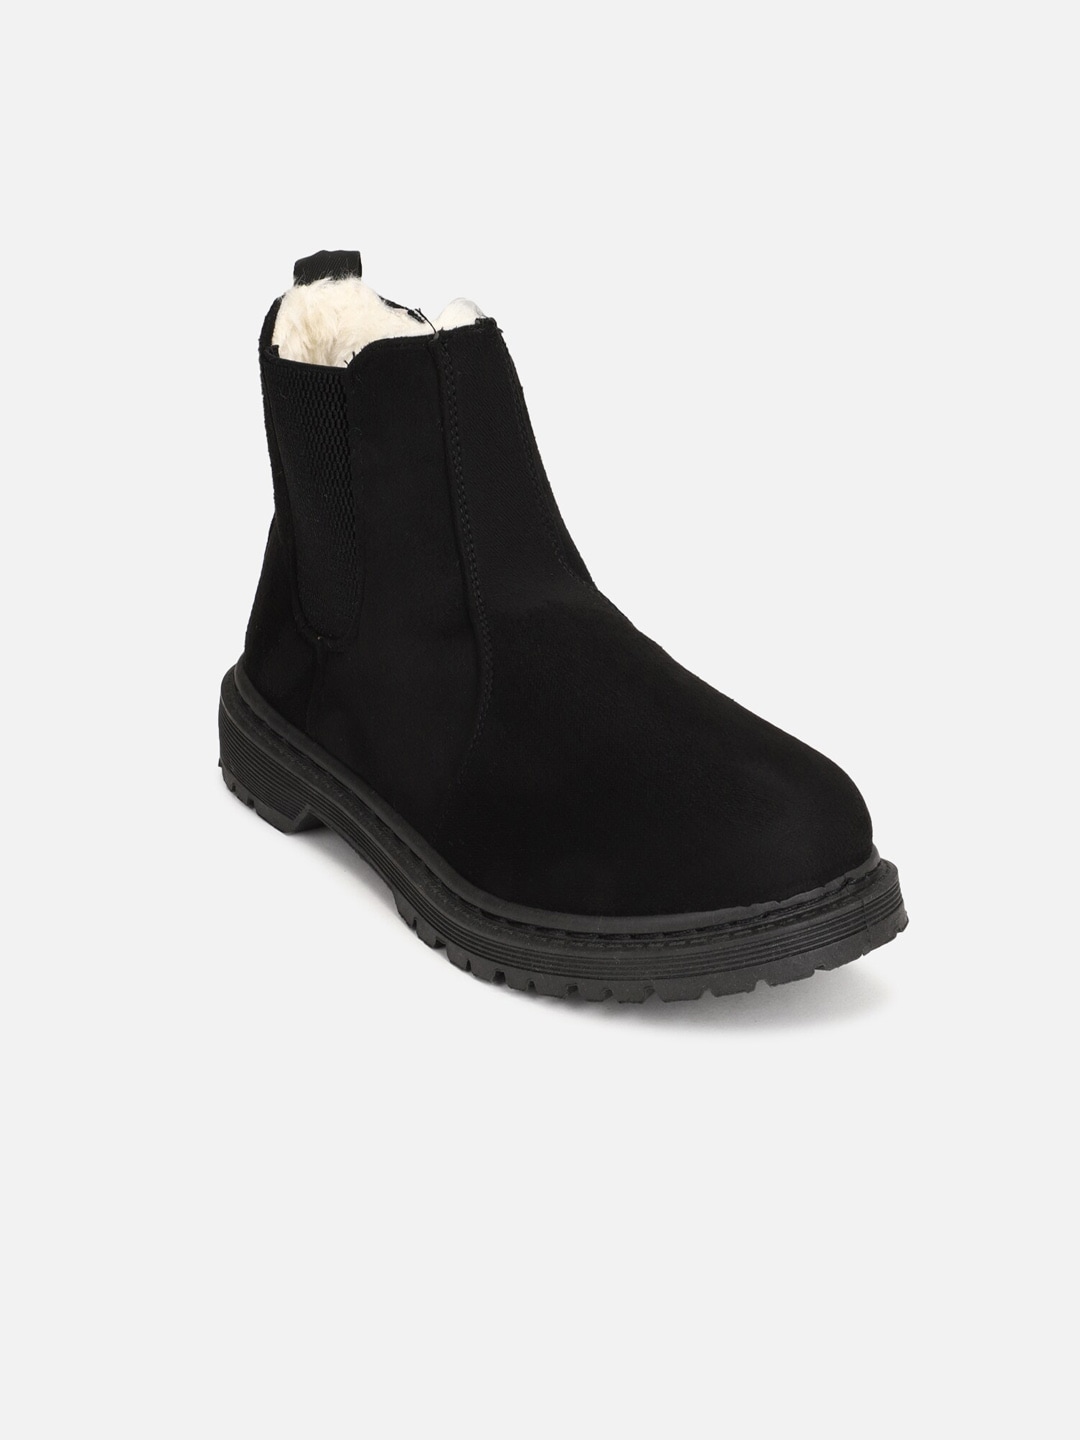 FOREVER 21 Women Black Solid Boots Price in India